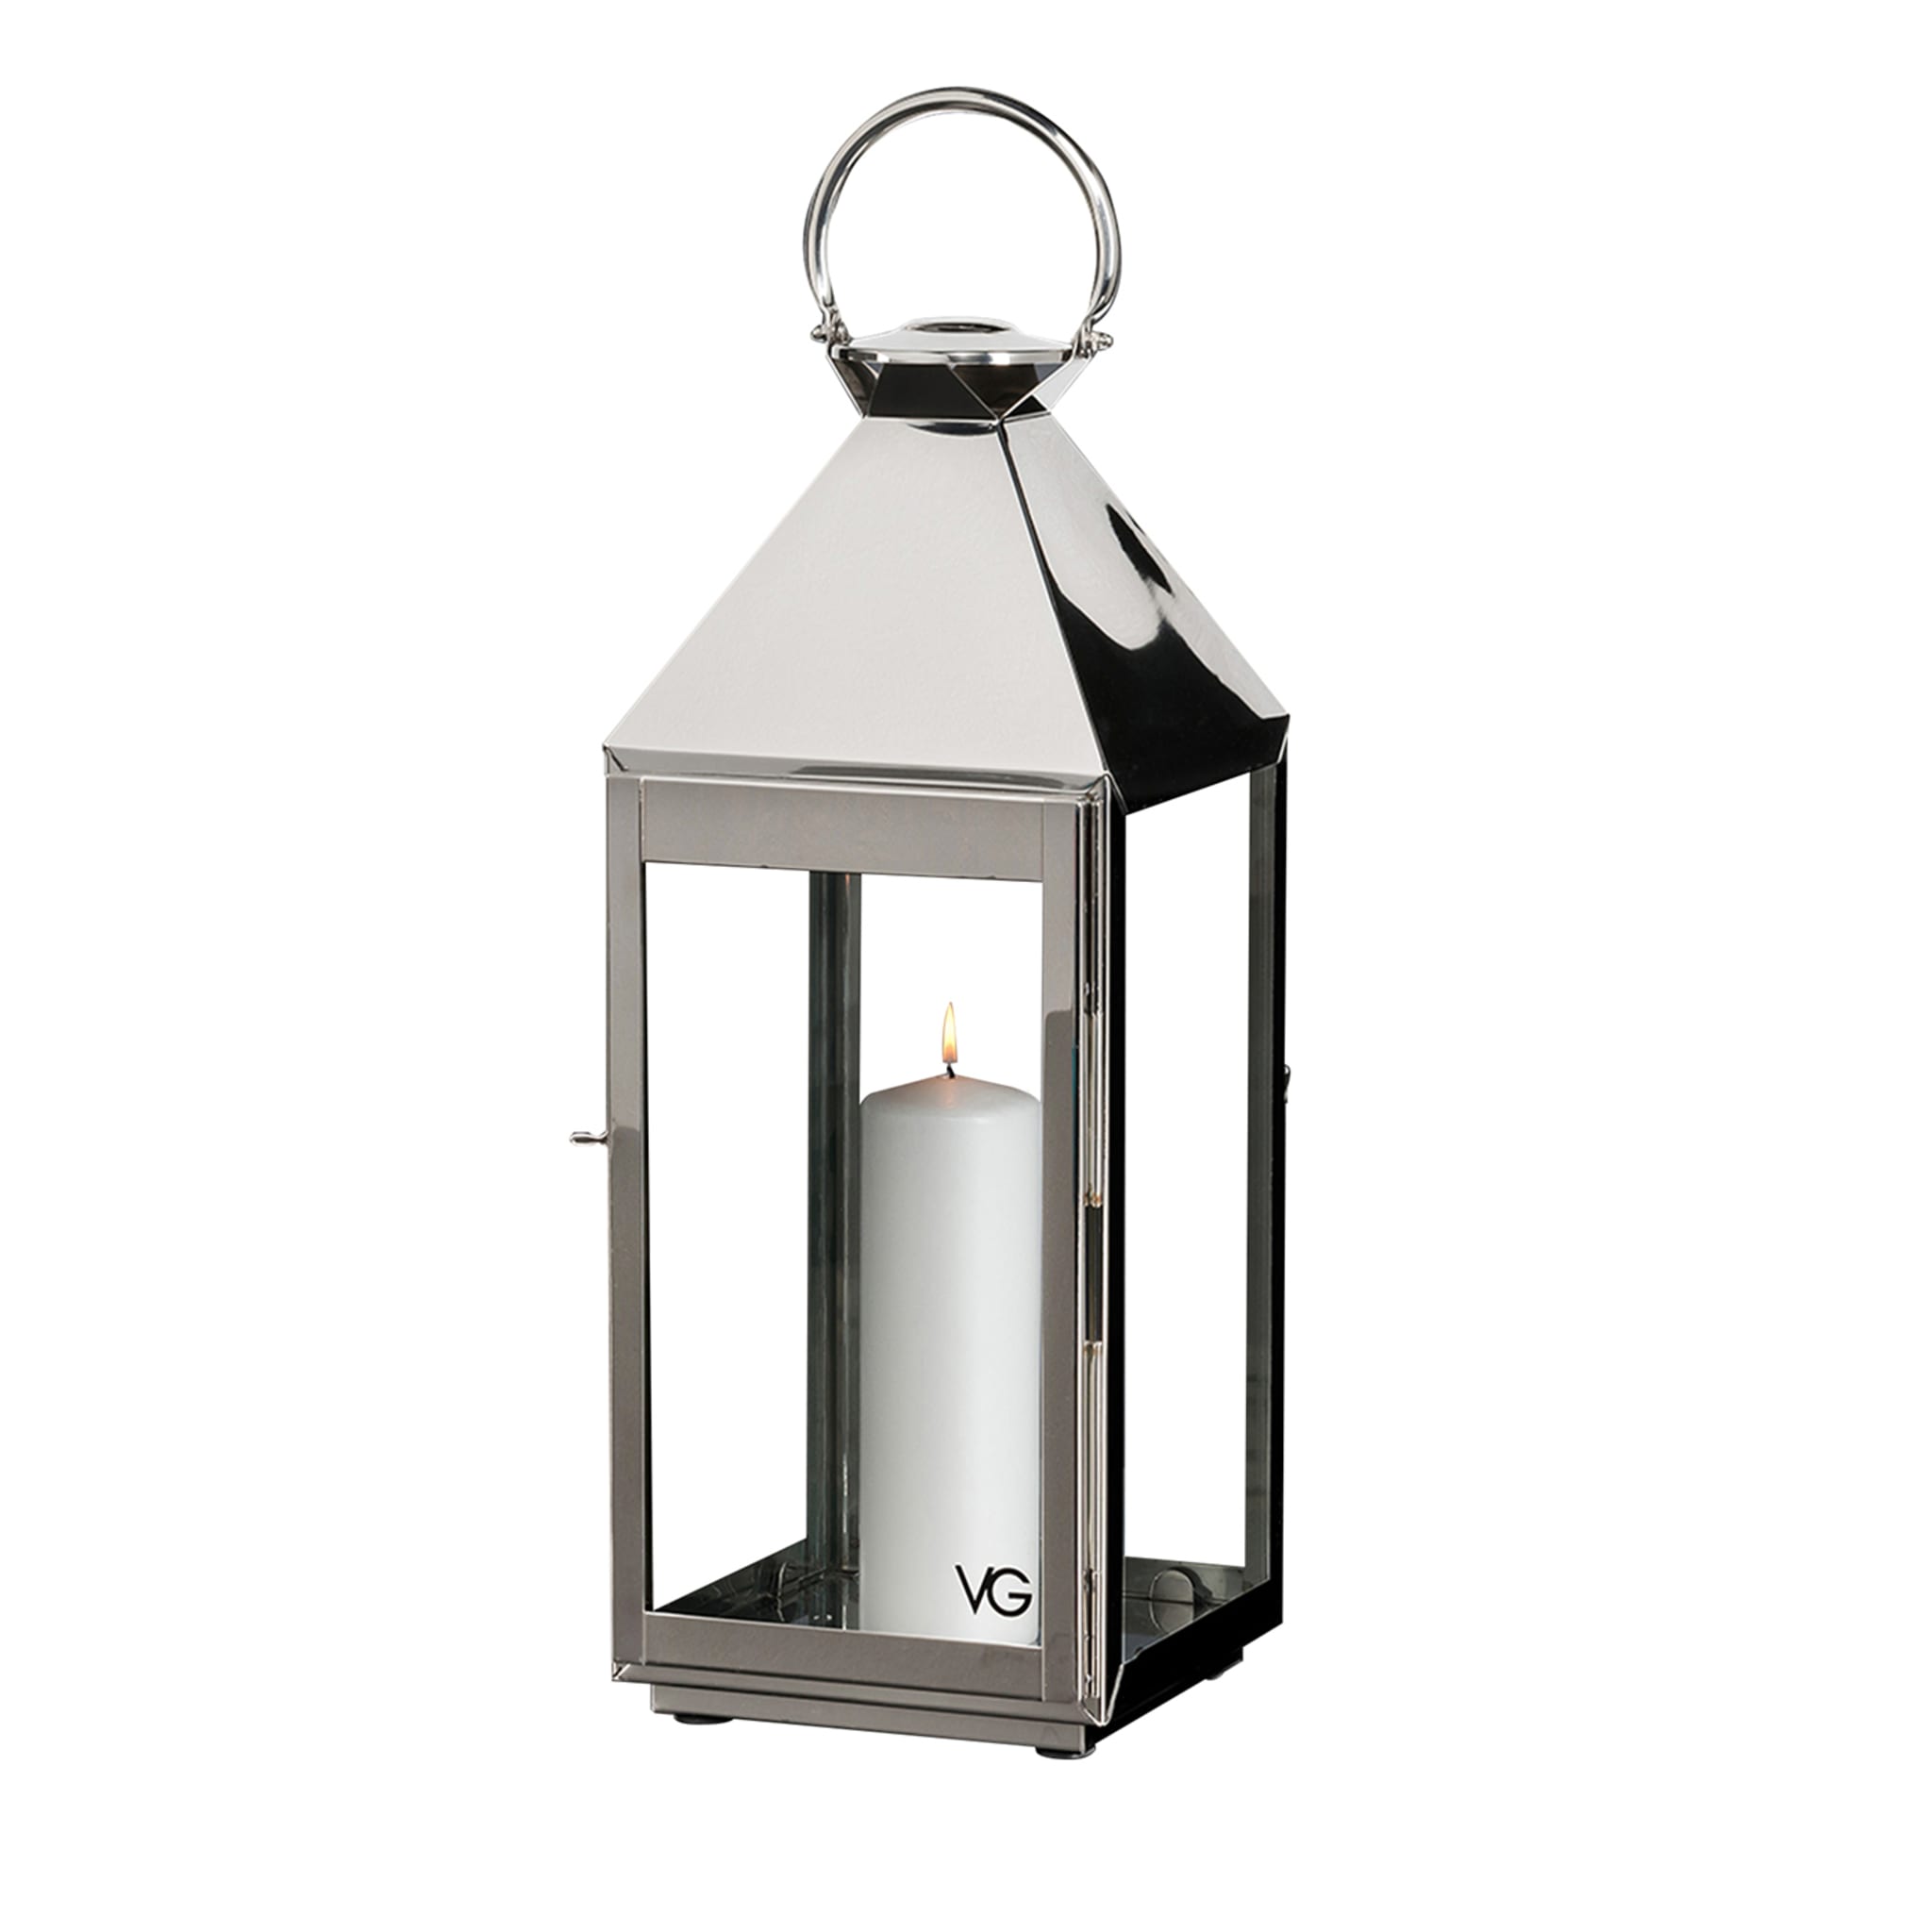 Stainless Steel Lantern with Pyramid Top - Main view